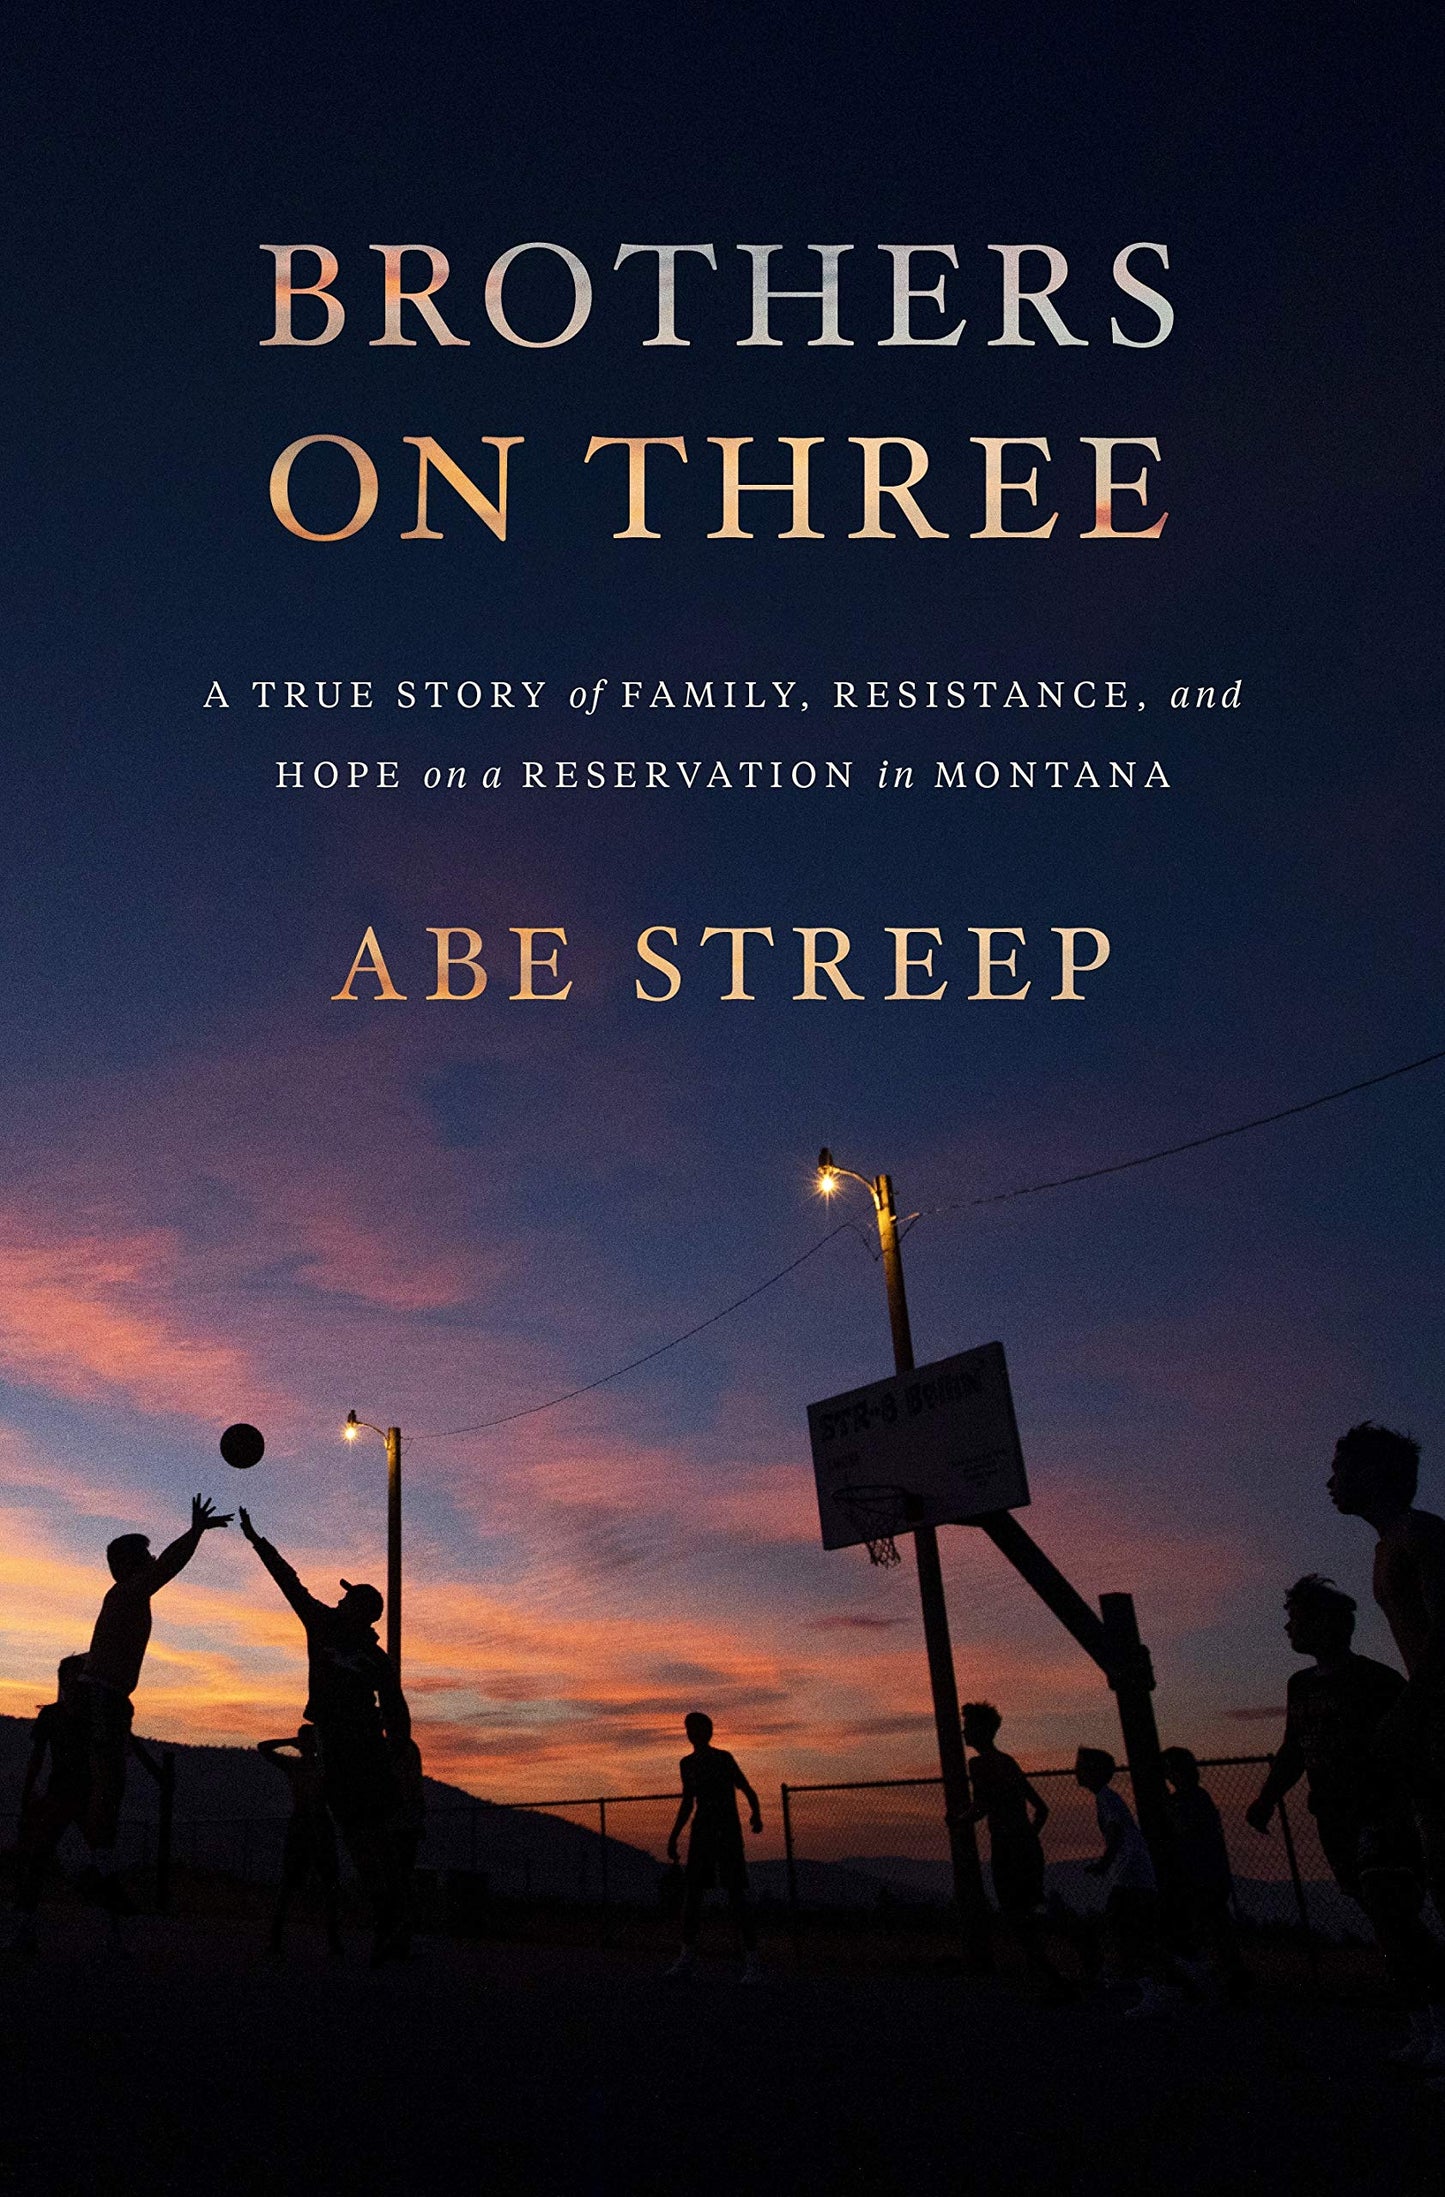 Brothers on Three: The True Story of Family, Resistance, and Hope on a Reservation in Montana